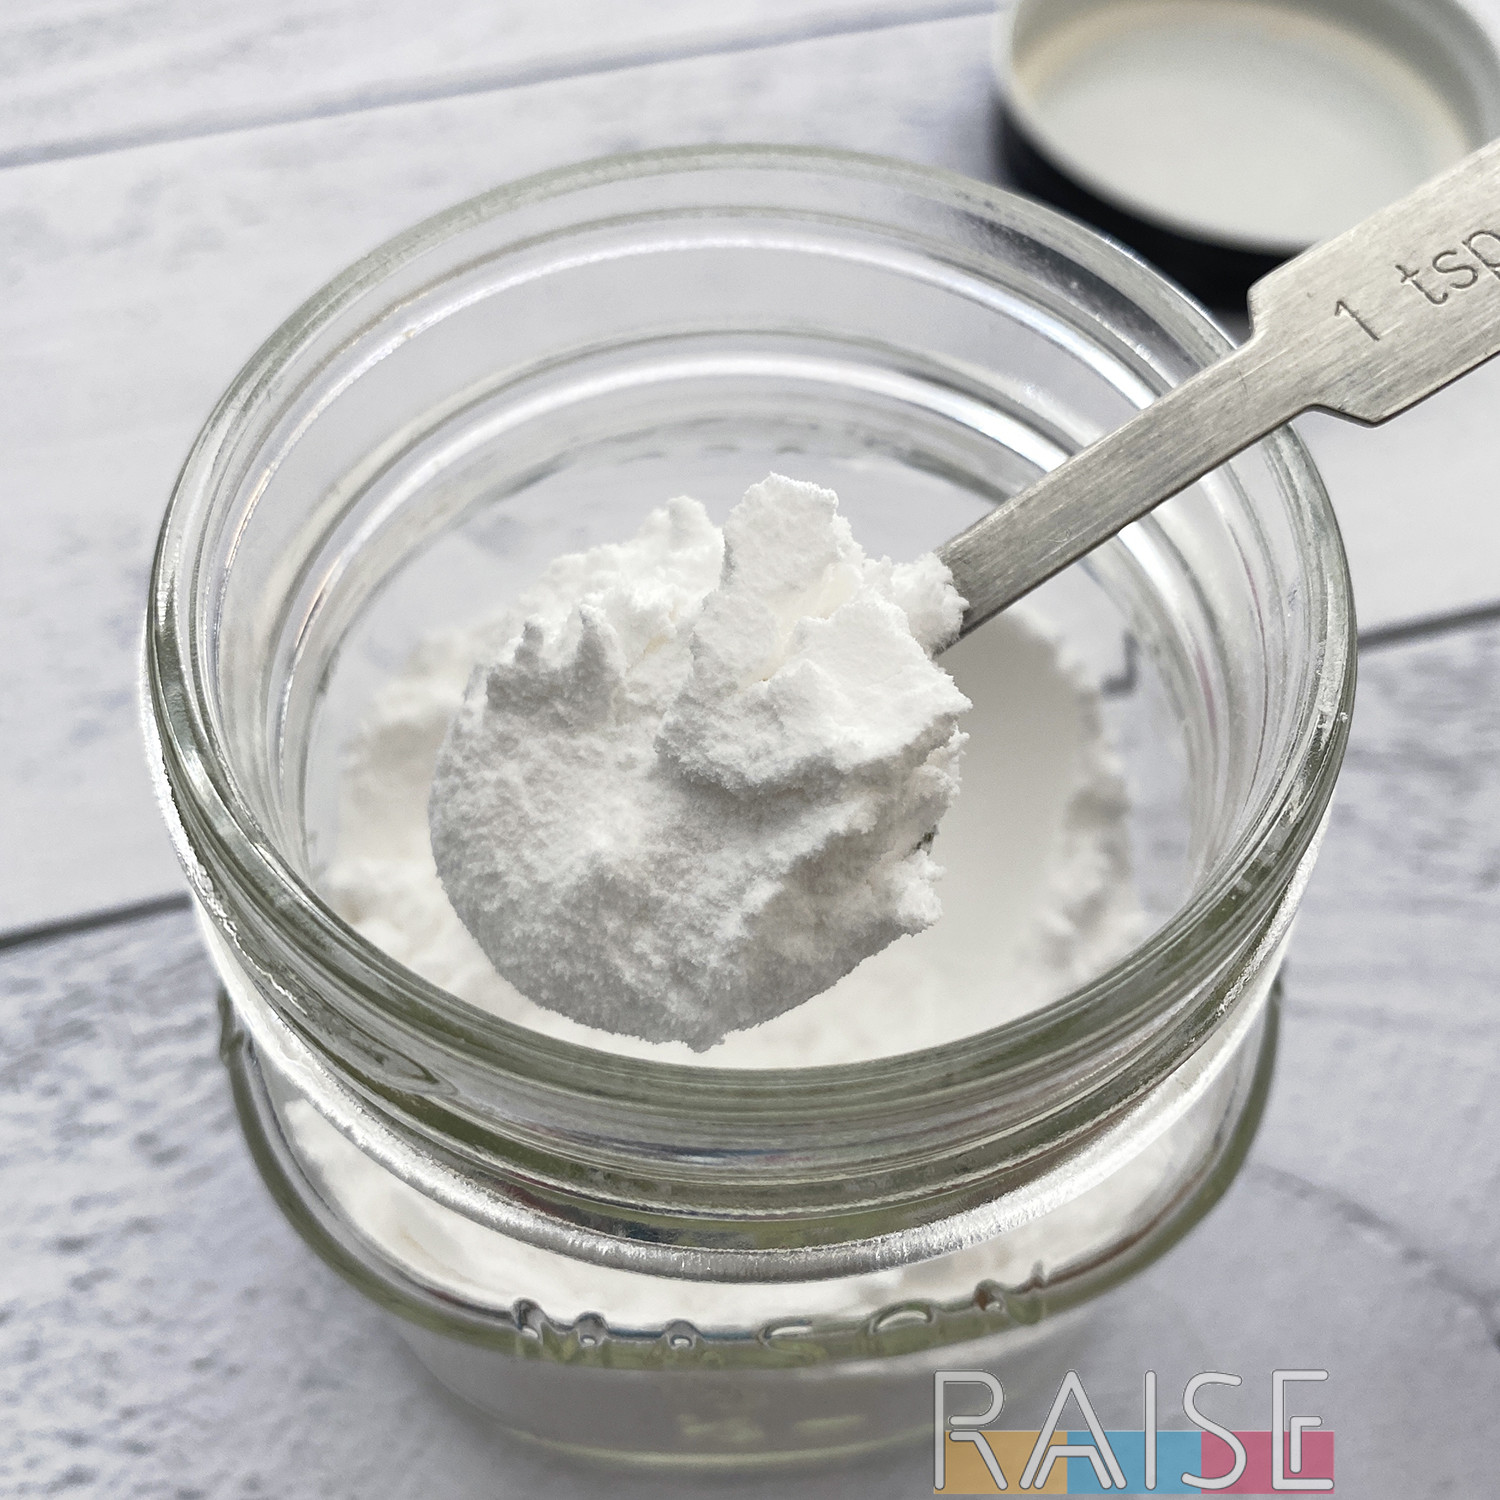 10 Best Baking Powder Substitutes - Easy Substitutes for Baking Powder